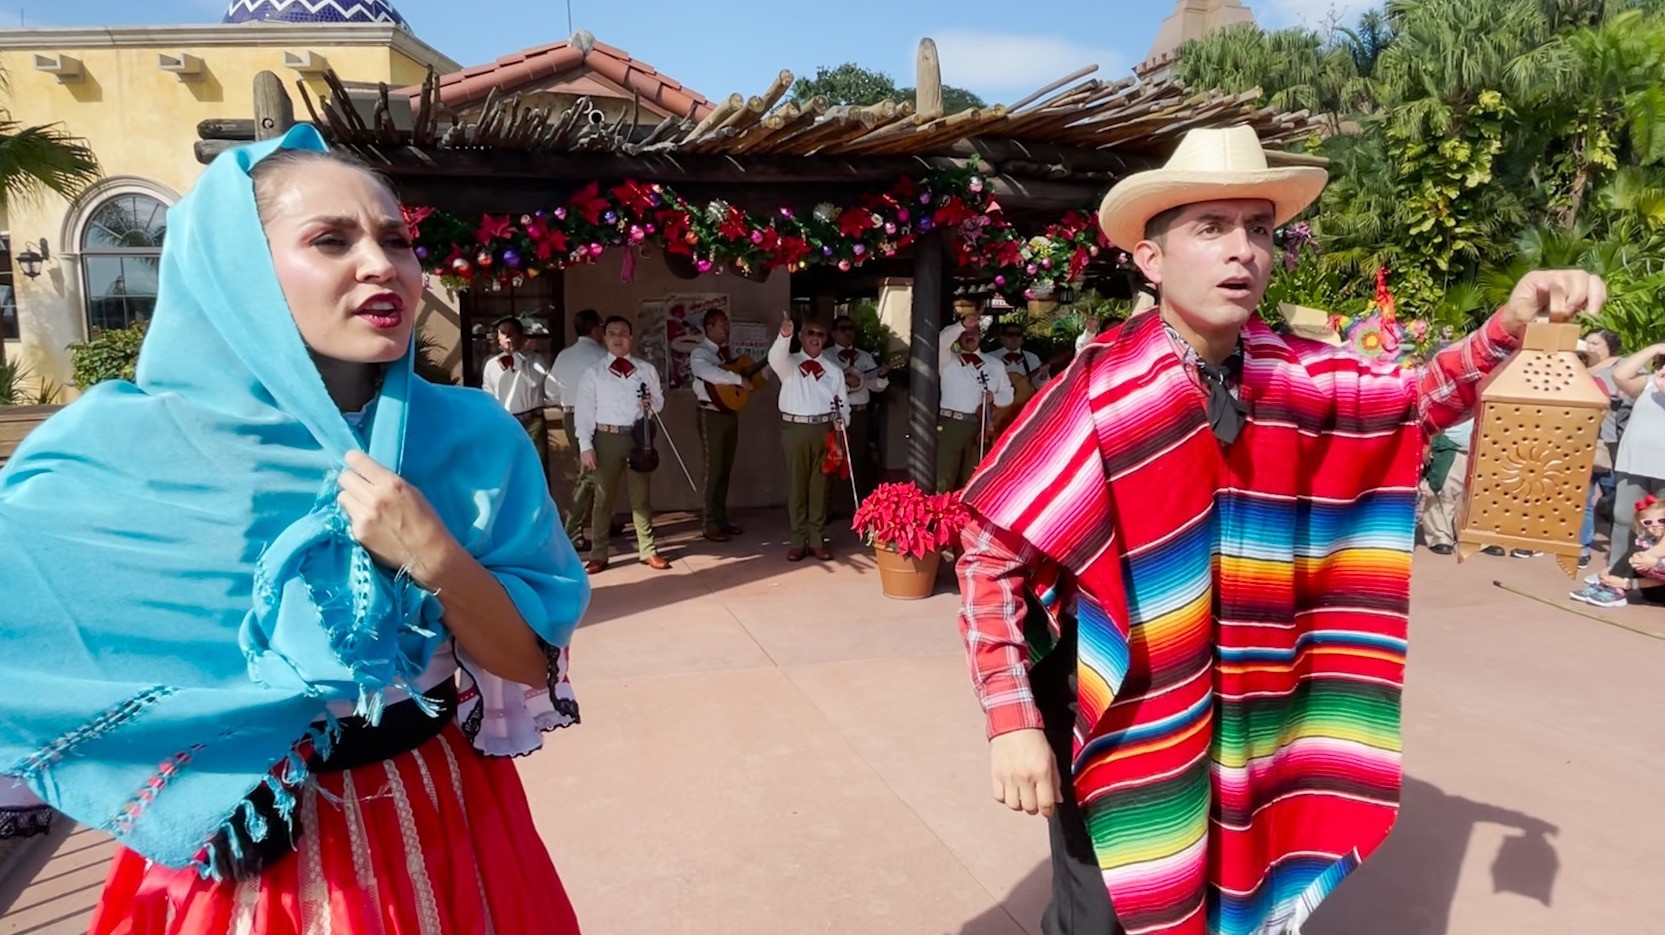 Video: Las Posadas Celebration at EPCOT during festival of the holidays